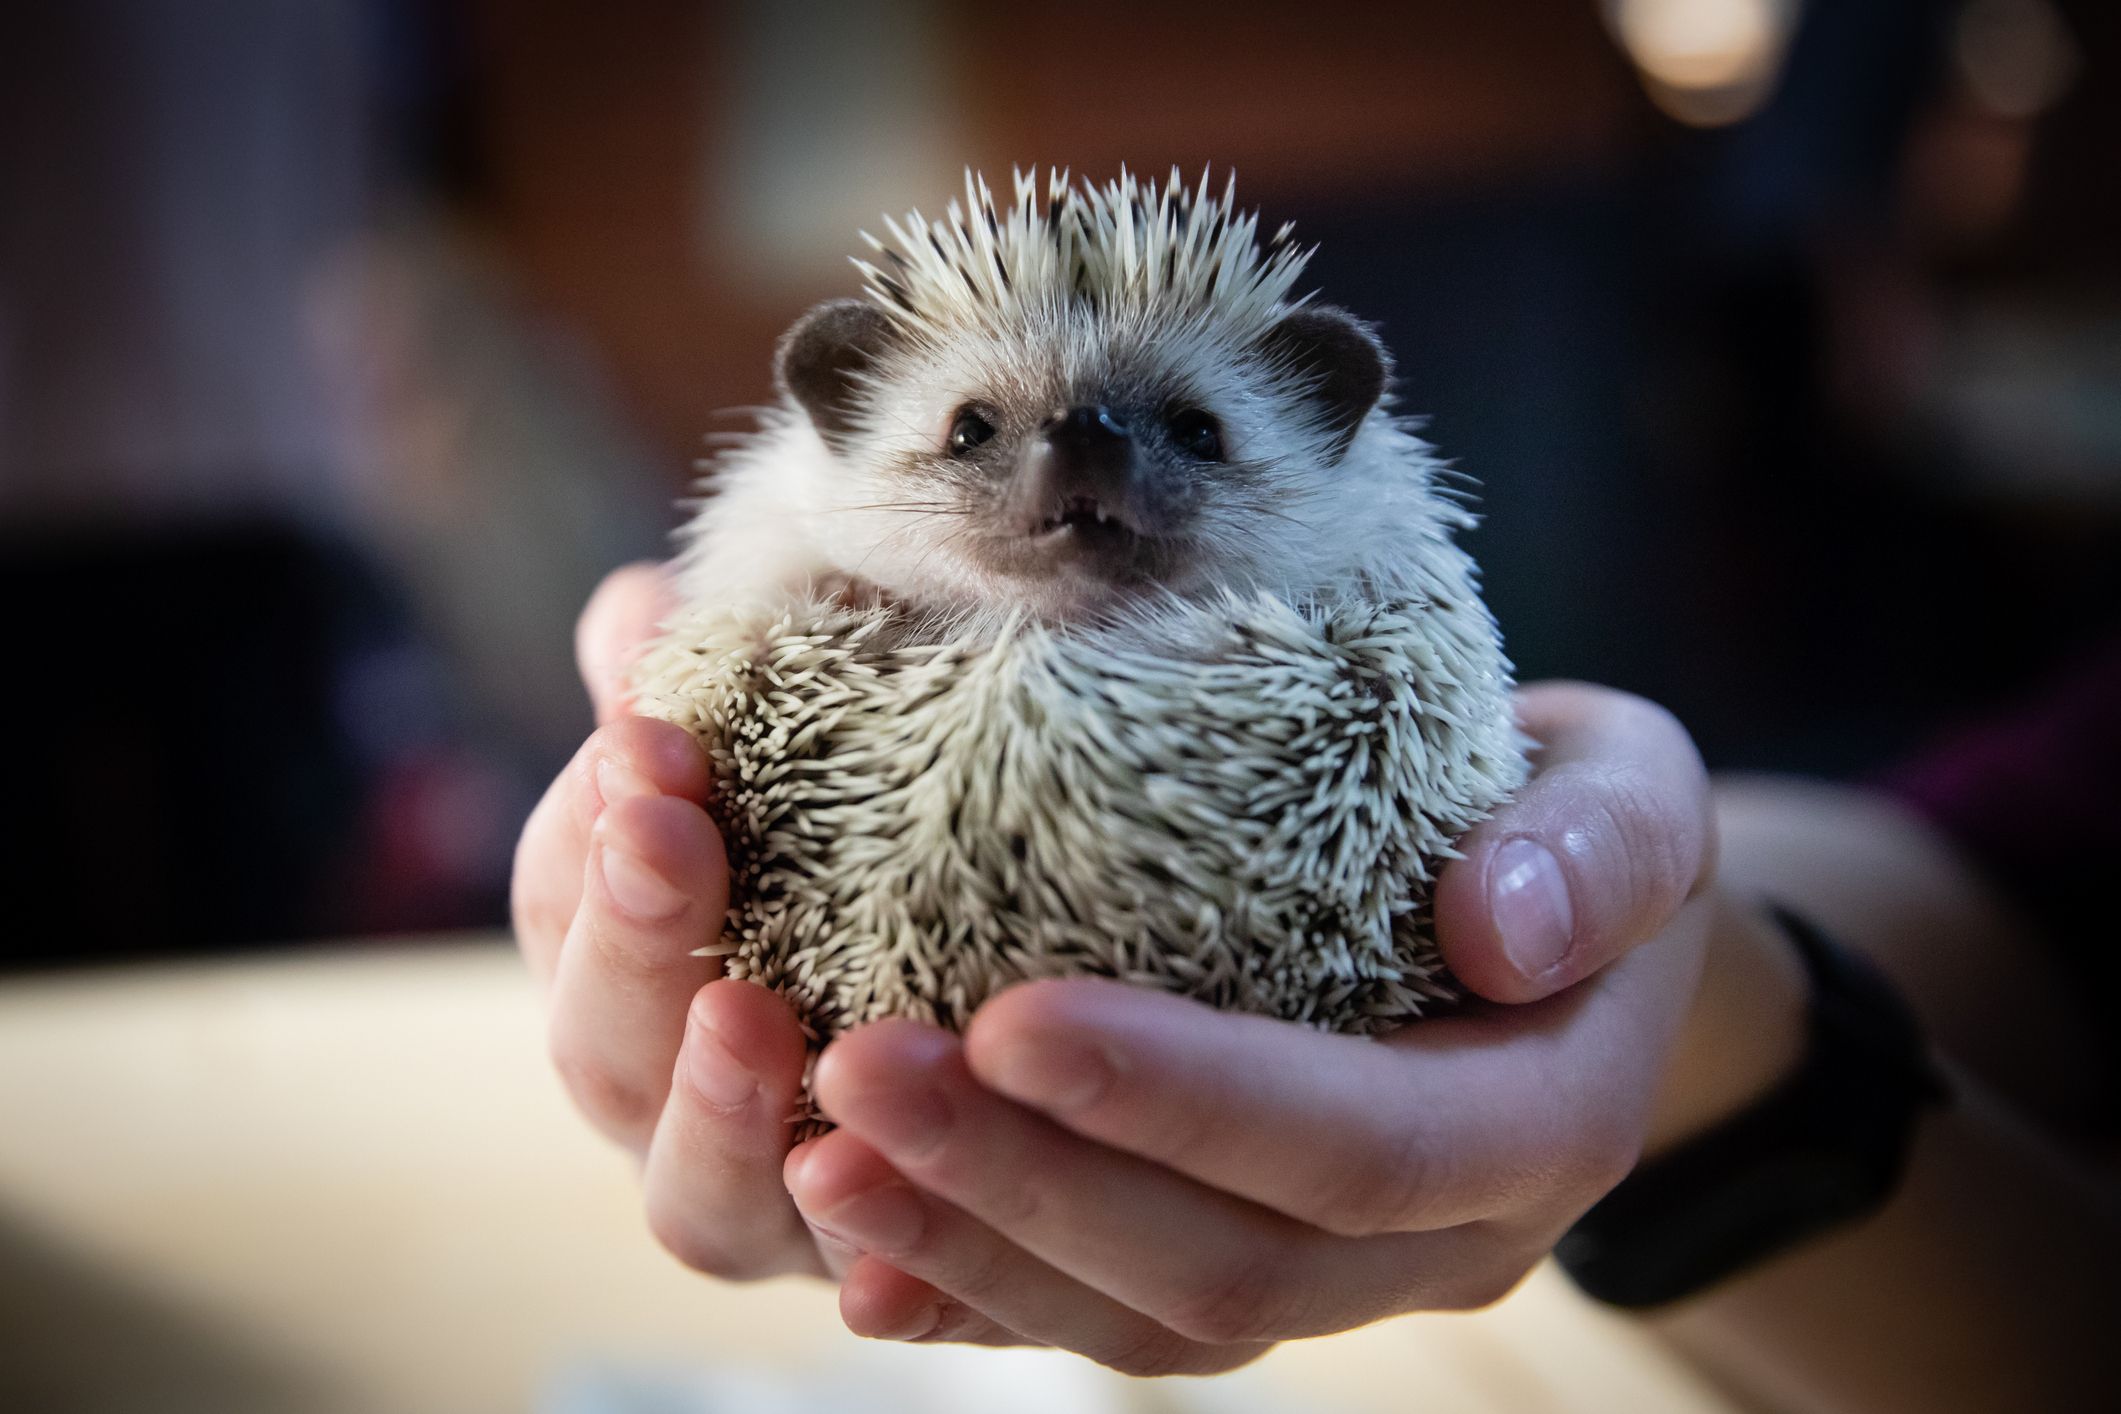 Always wash your hands thoroughly after handling a hedgehog.